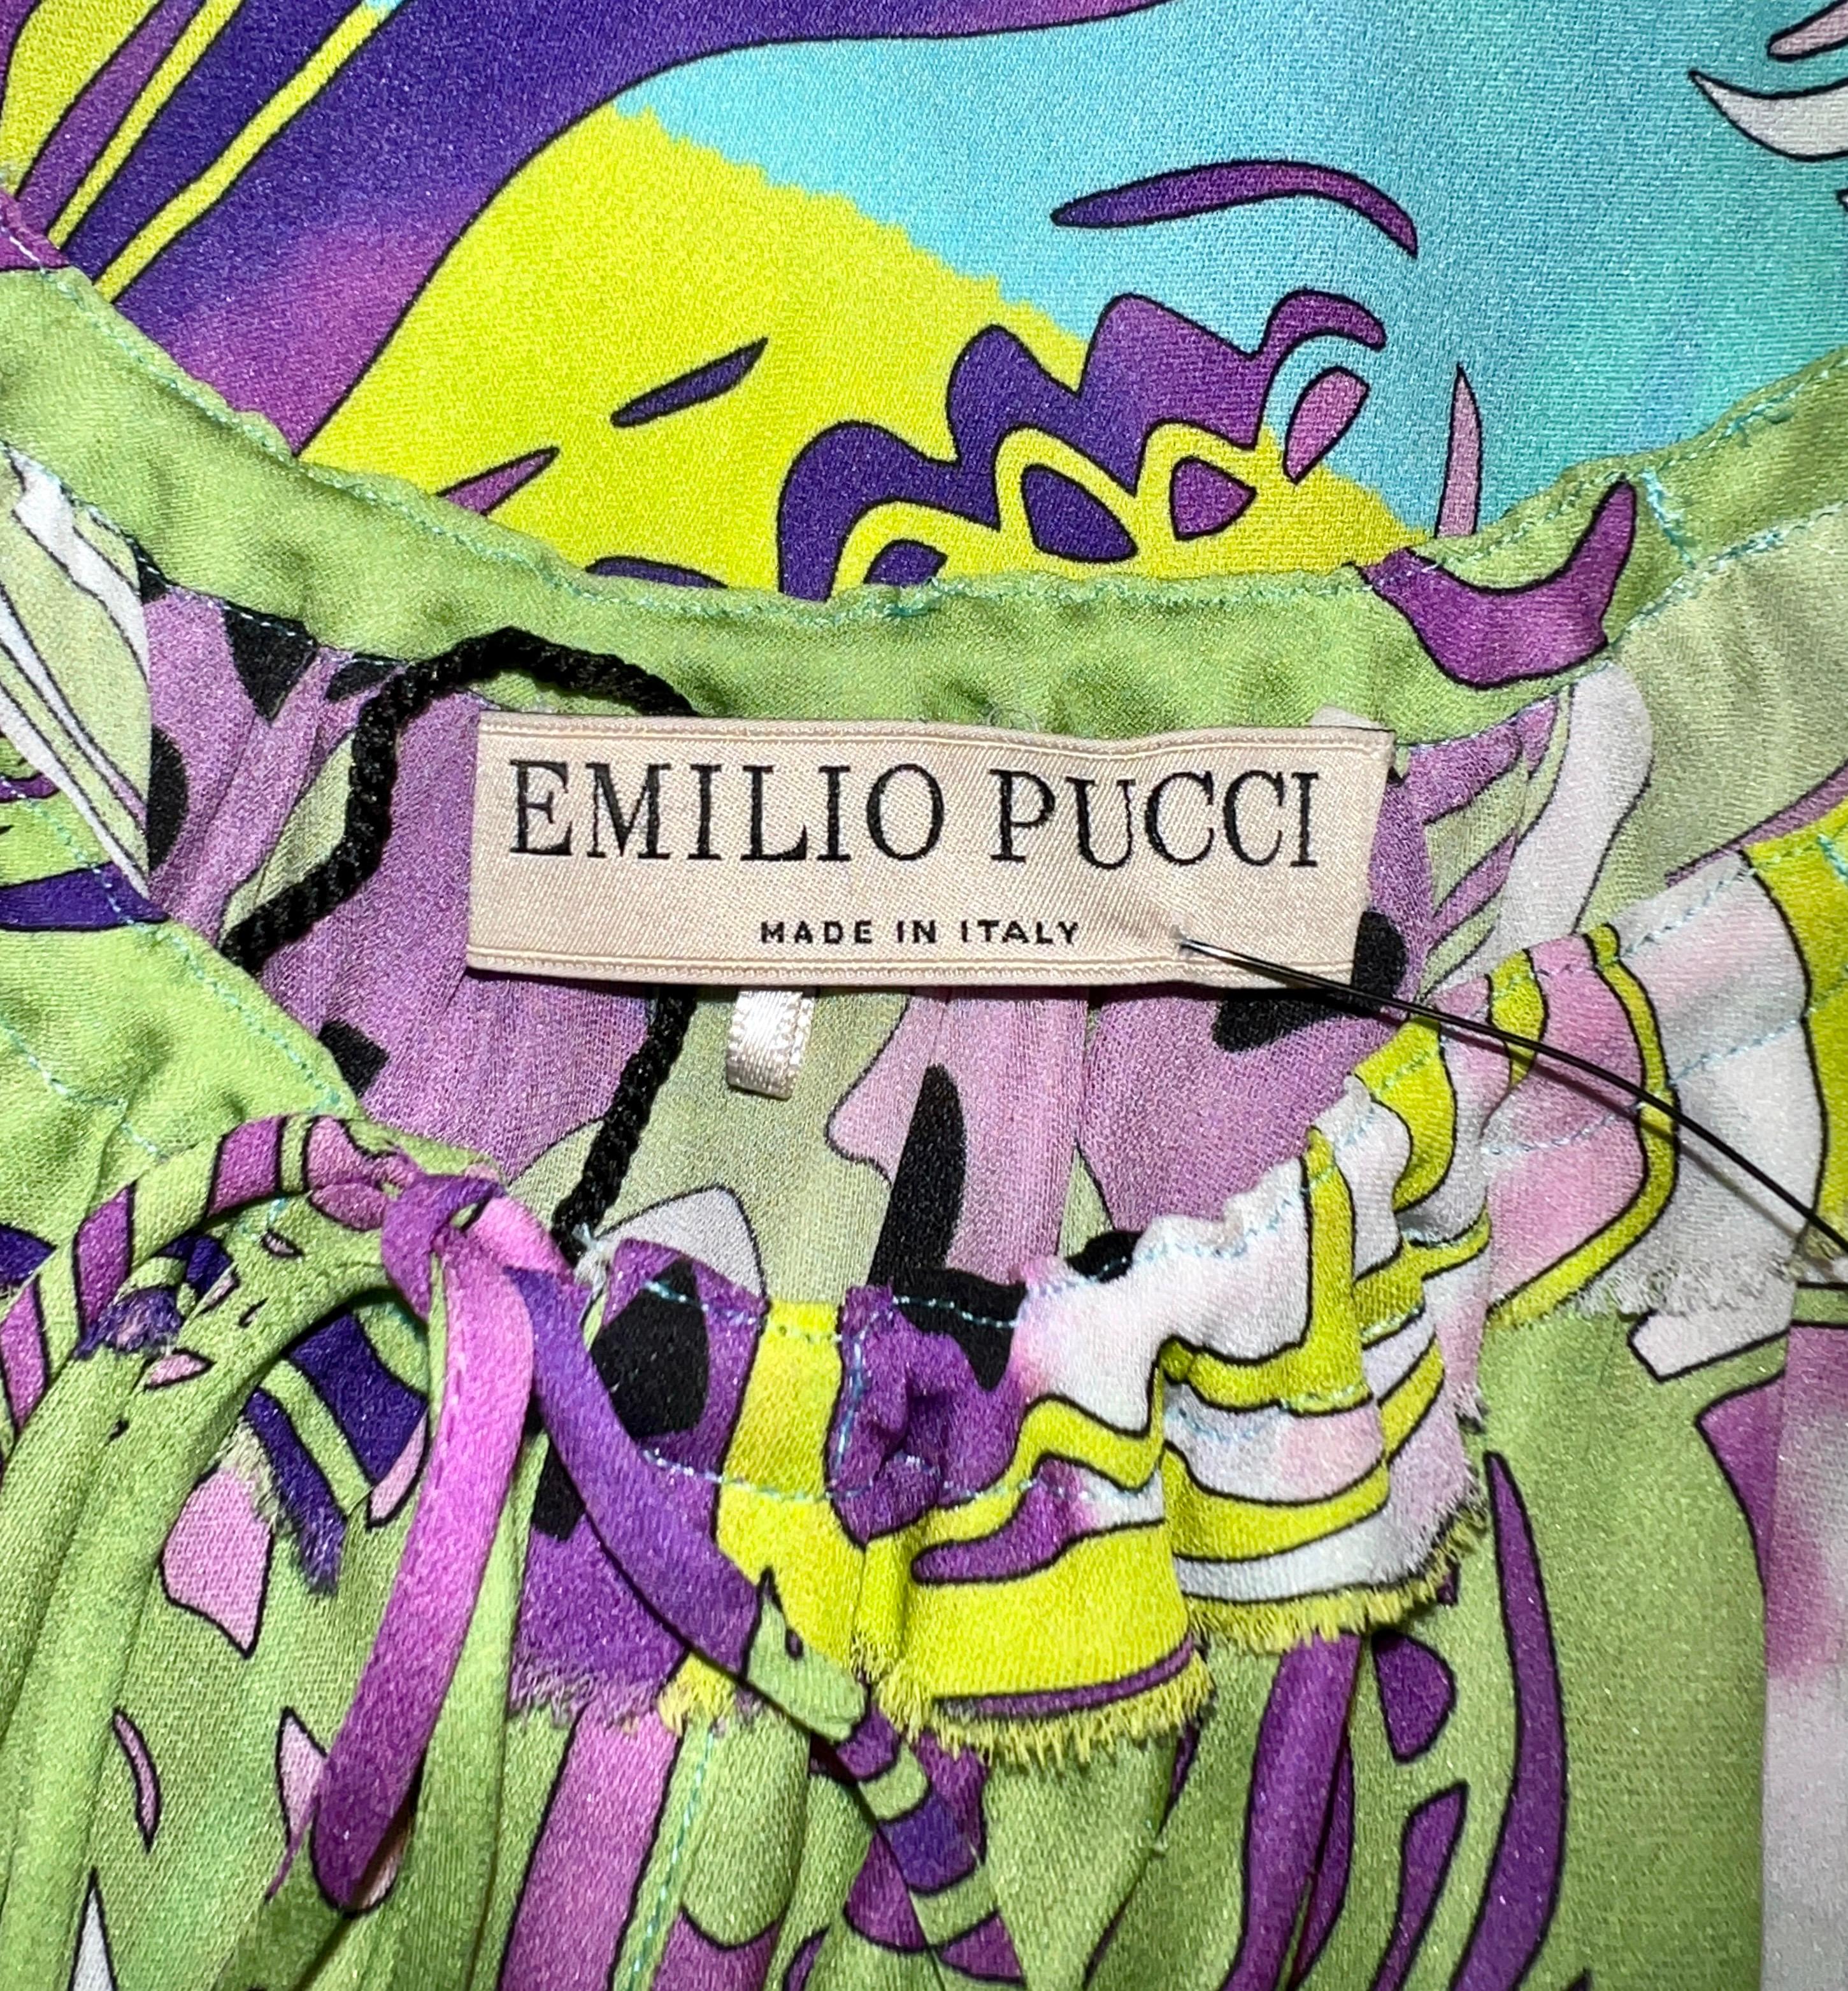 NEW Emilio Pucci Tie Dye Silk Star Print Top Shirt Sleeveless Blouse Tunic 40 For Sale 4